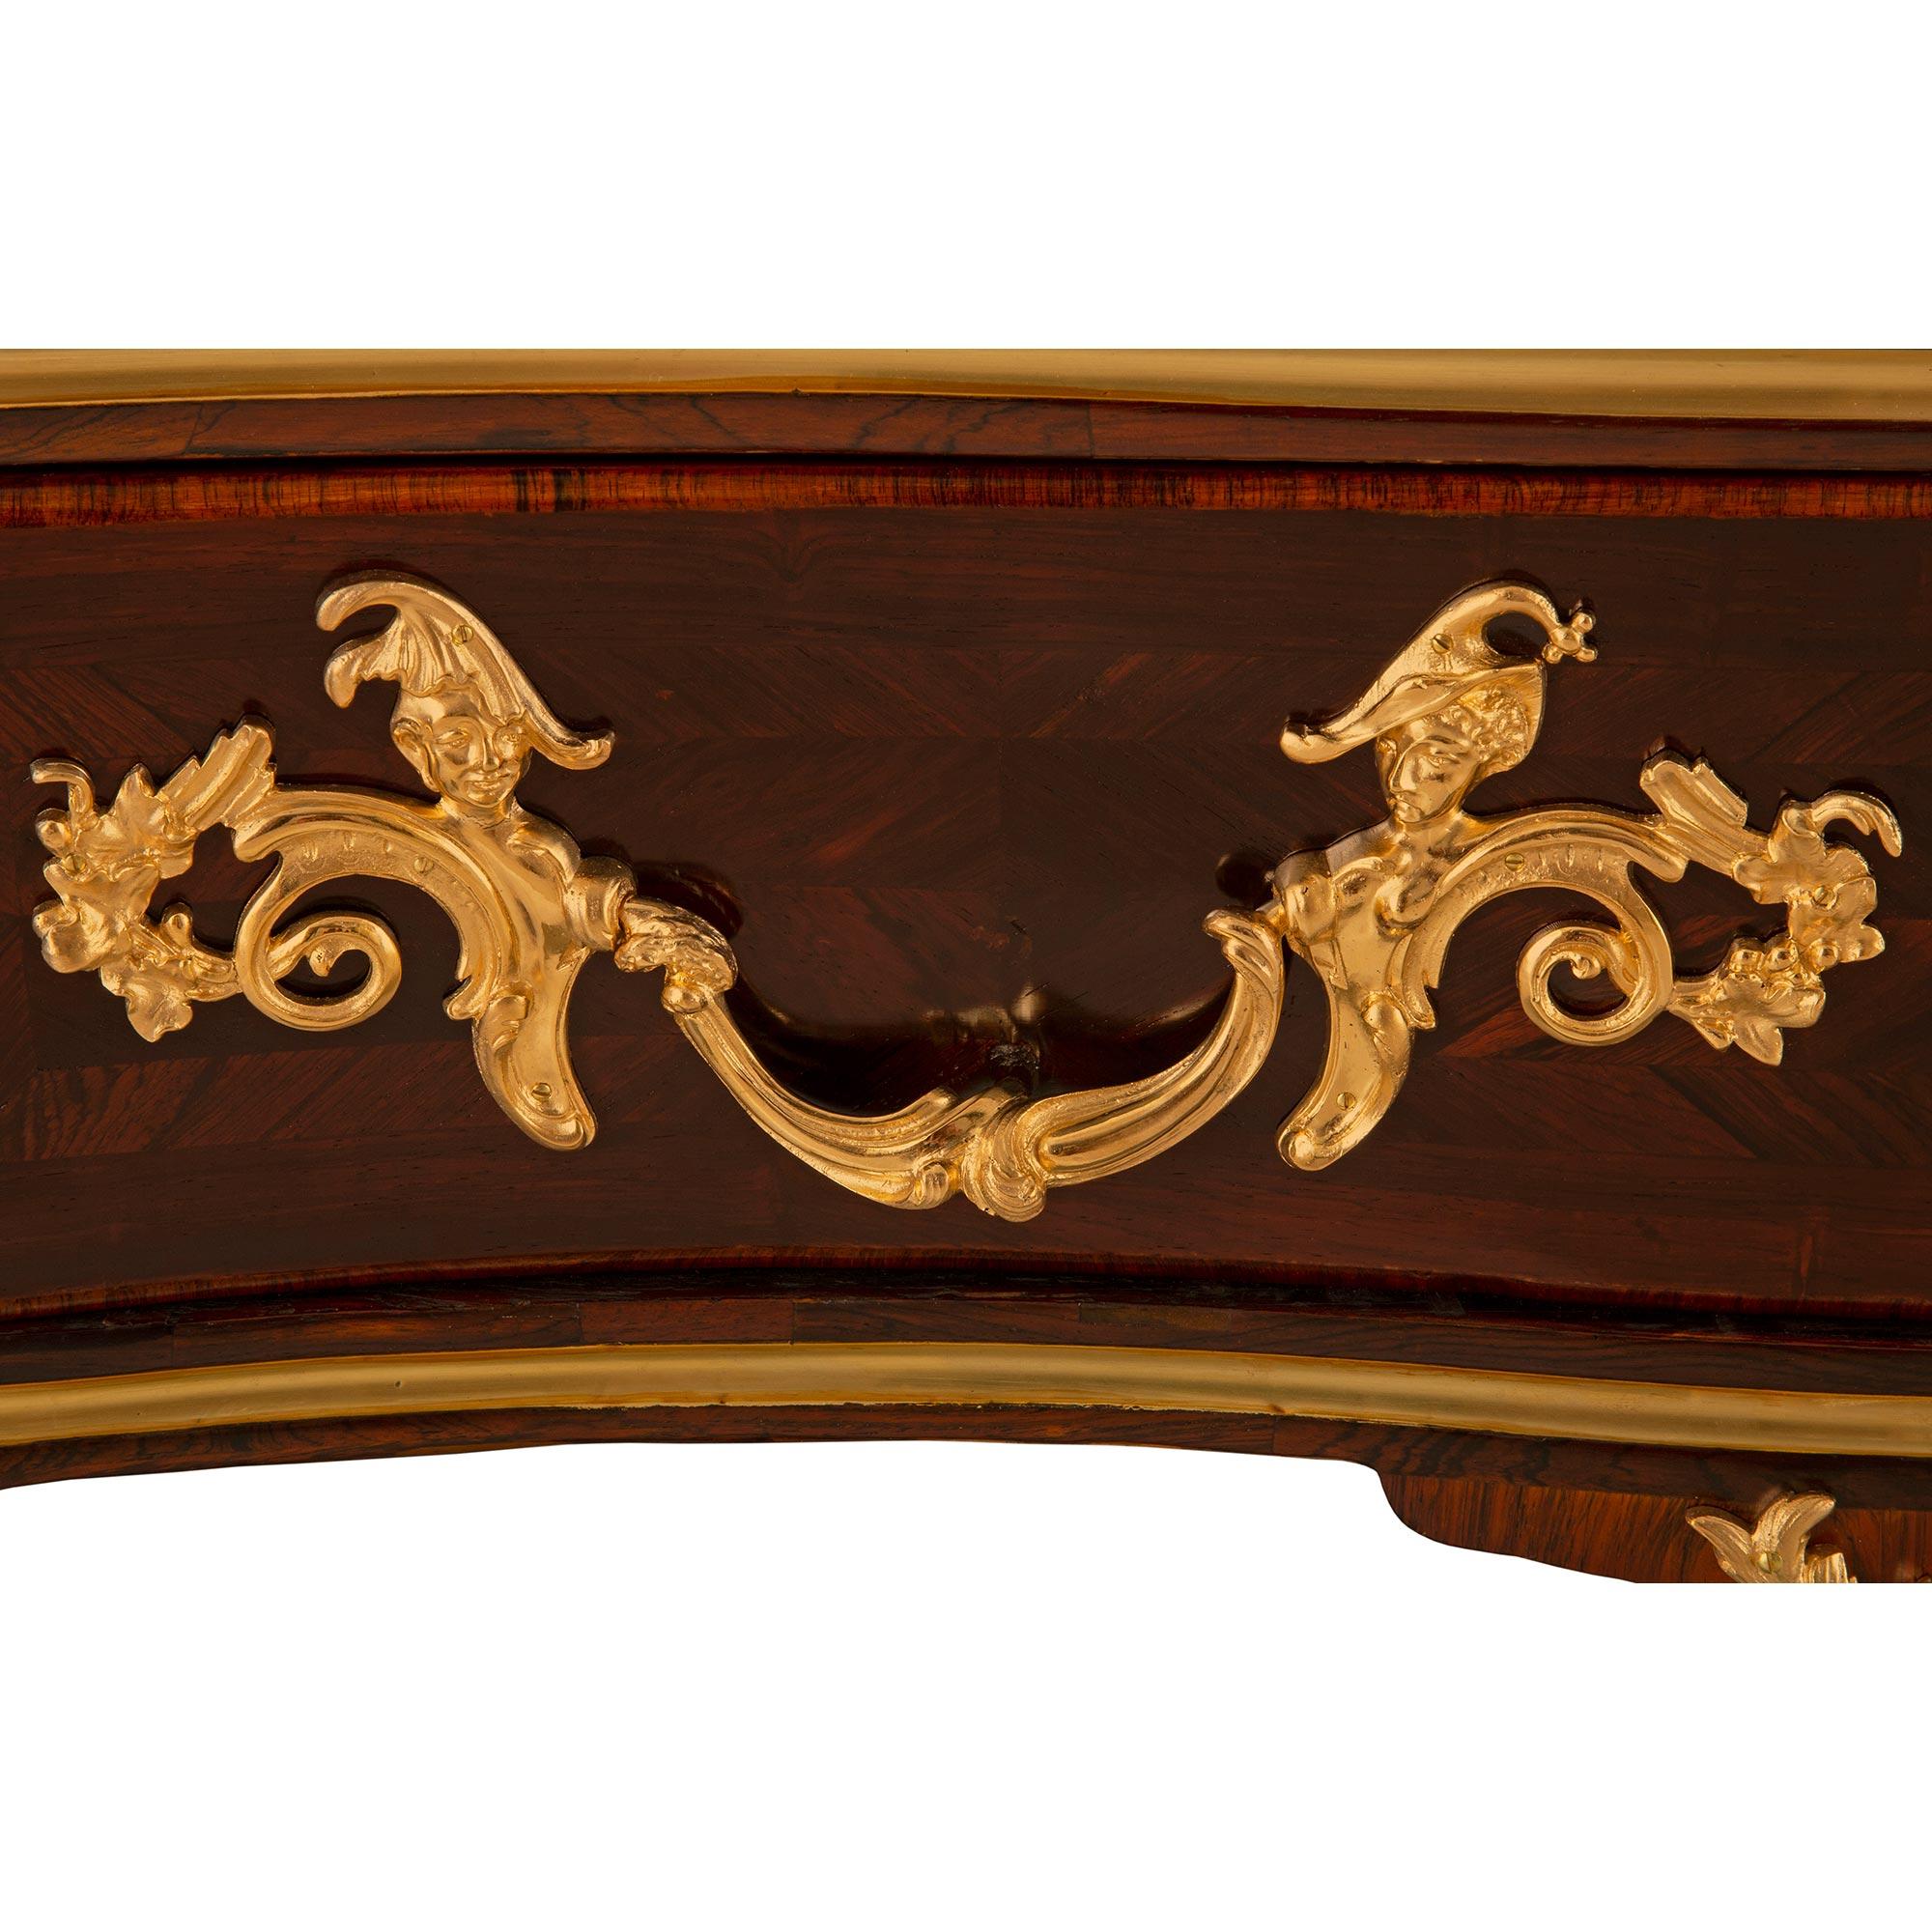 French Mid-18th Century Régence Period Rosewood, Ormolu and Marble Commode For Sale 5